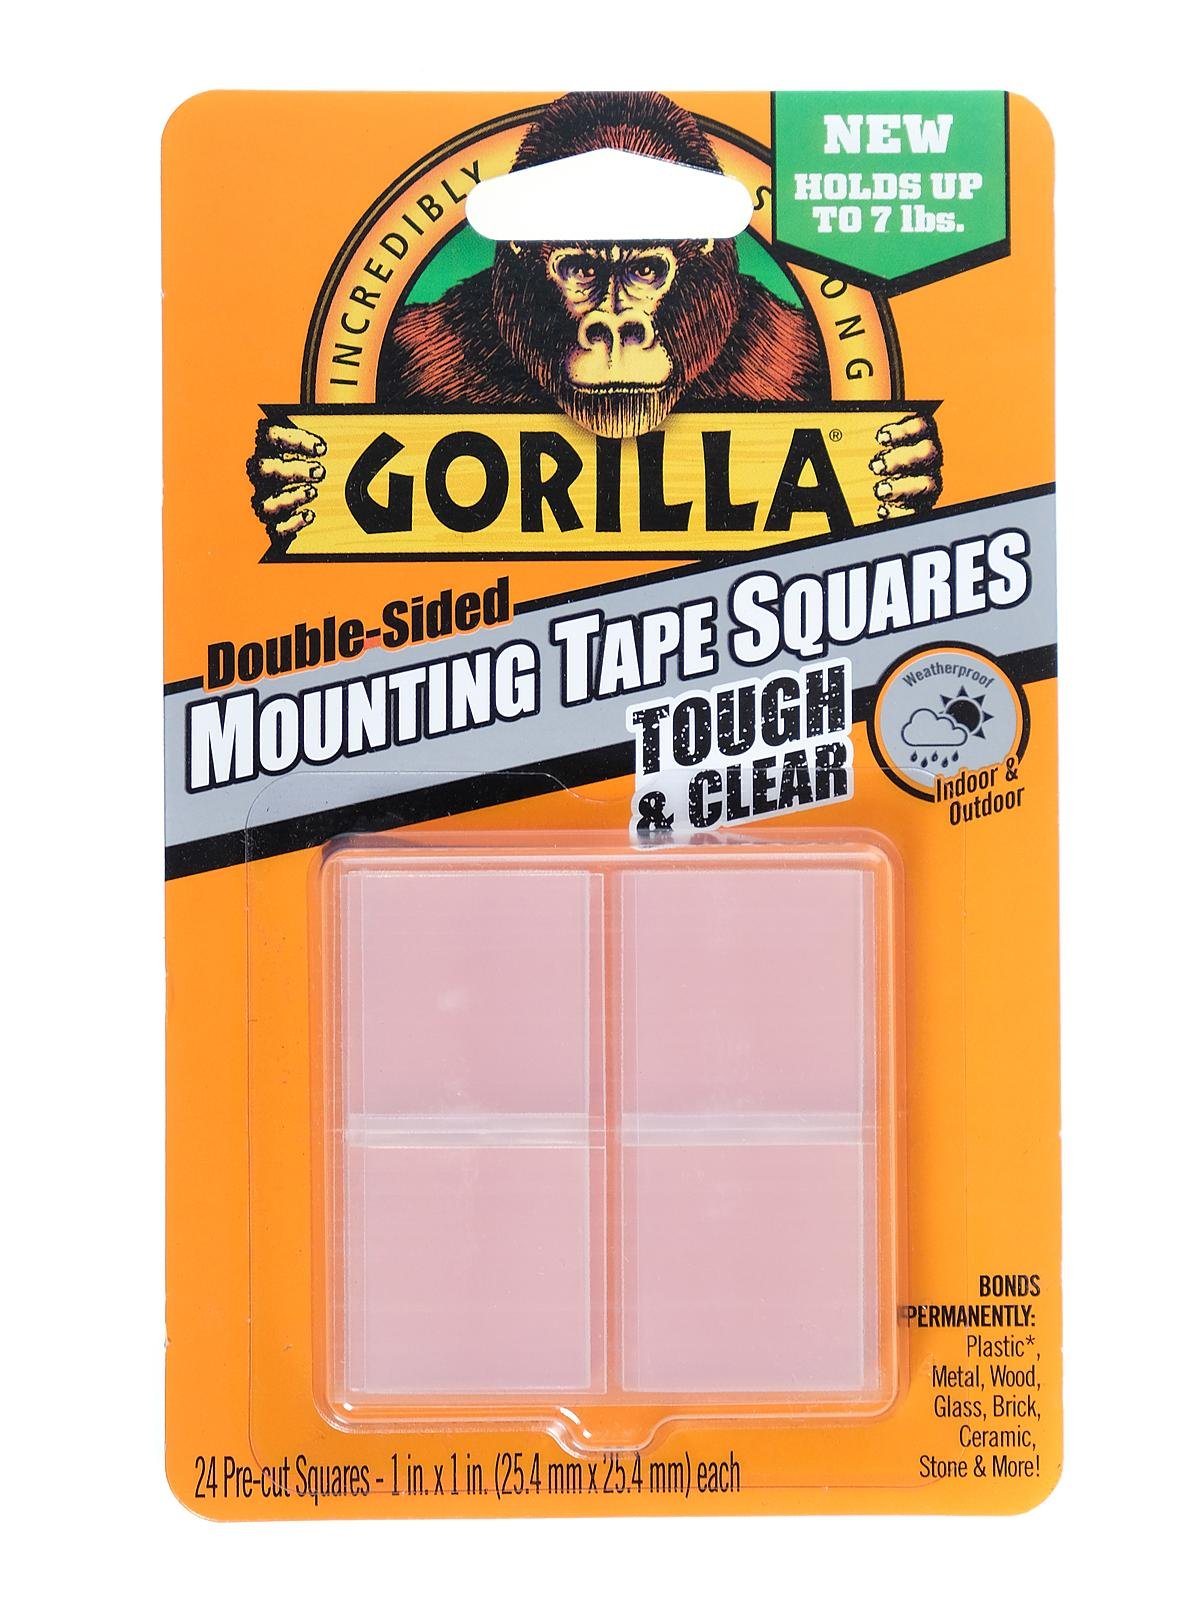 Gorilla Tough & Clear Mounting Tape